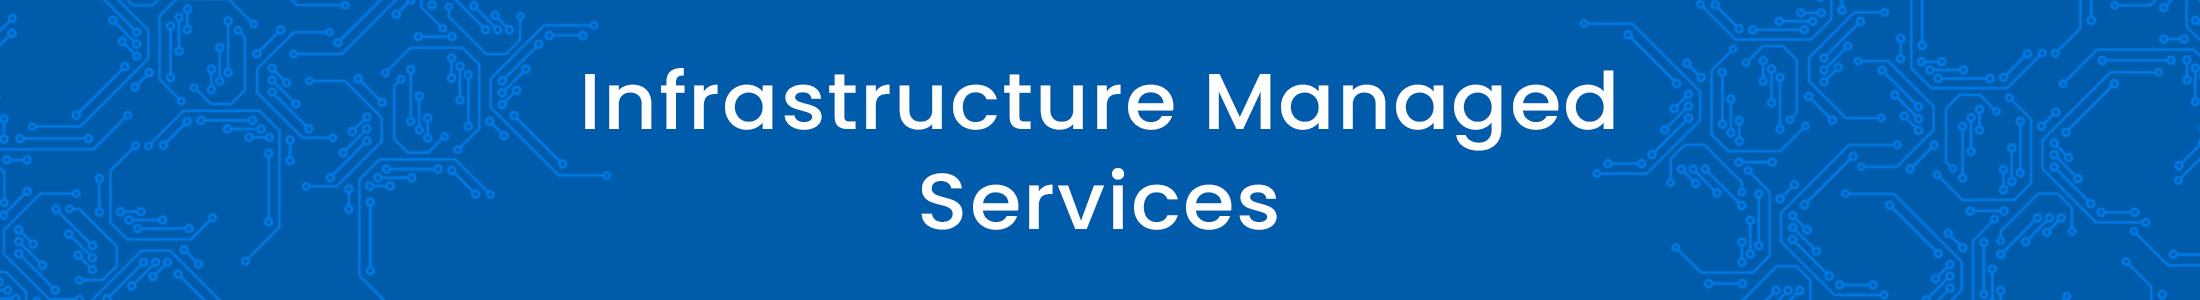 infrastructure-managed-services